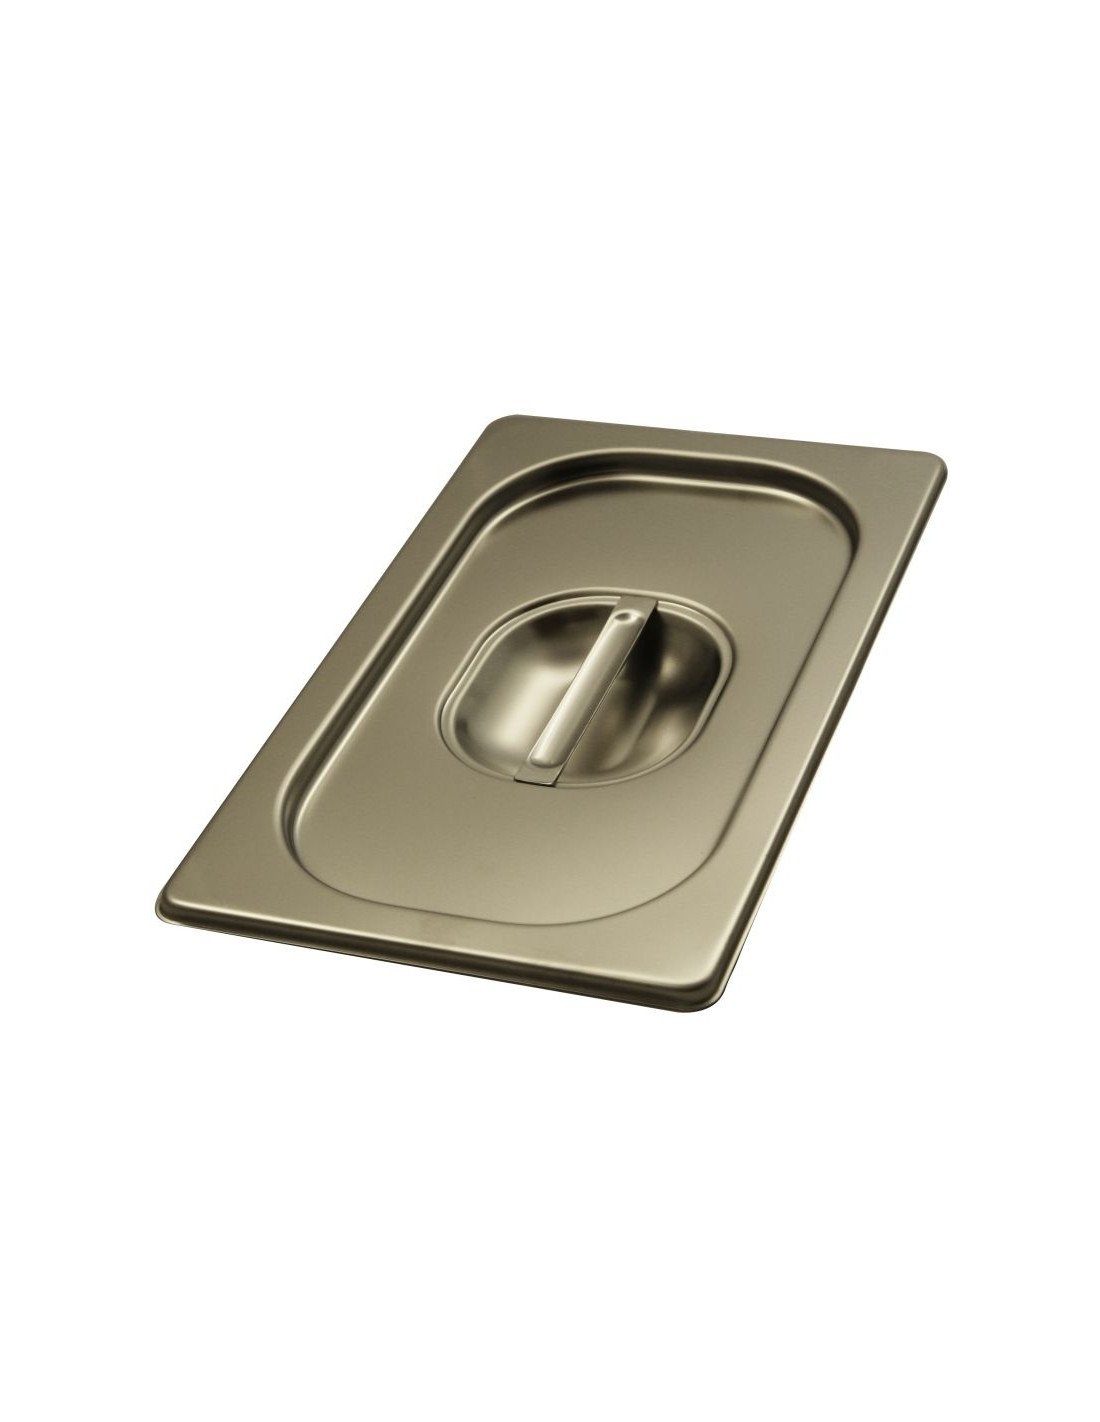 Stainless steel lid for GN 1/4 containers